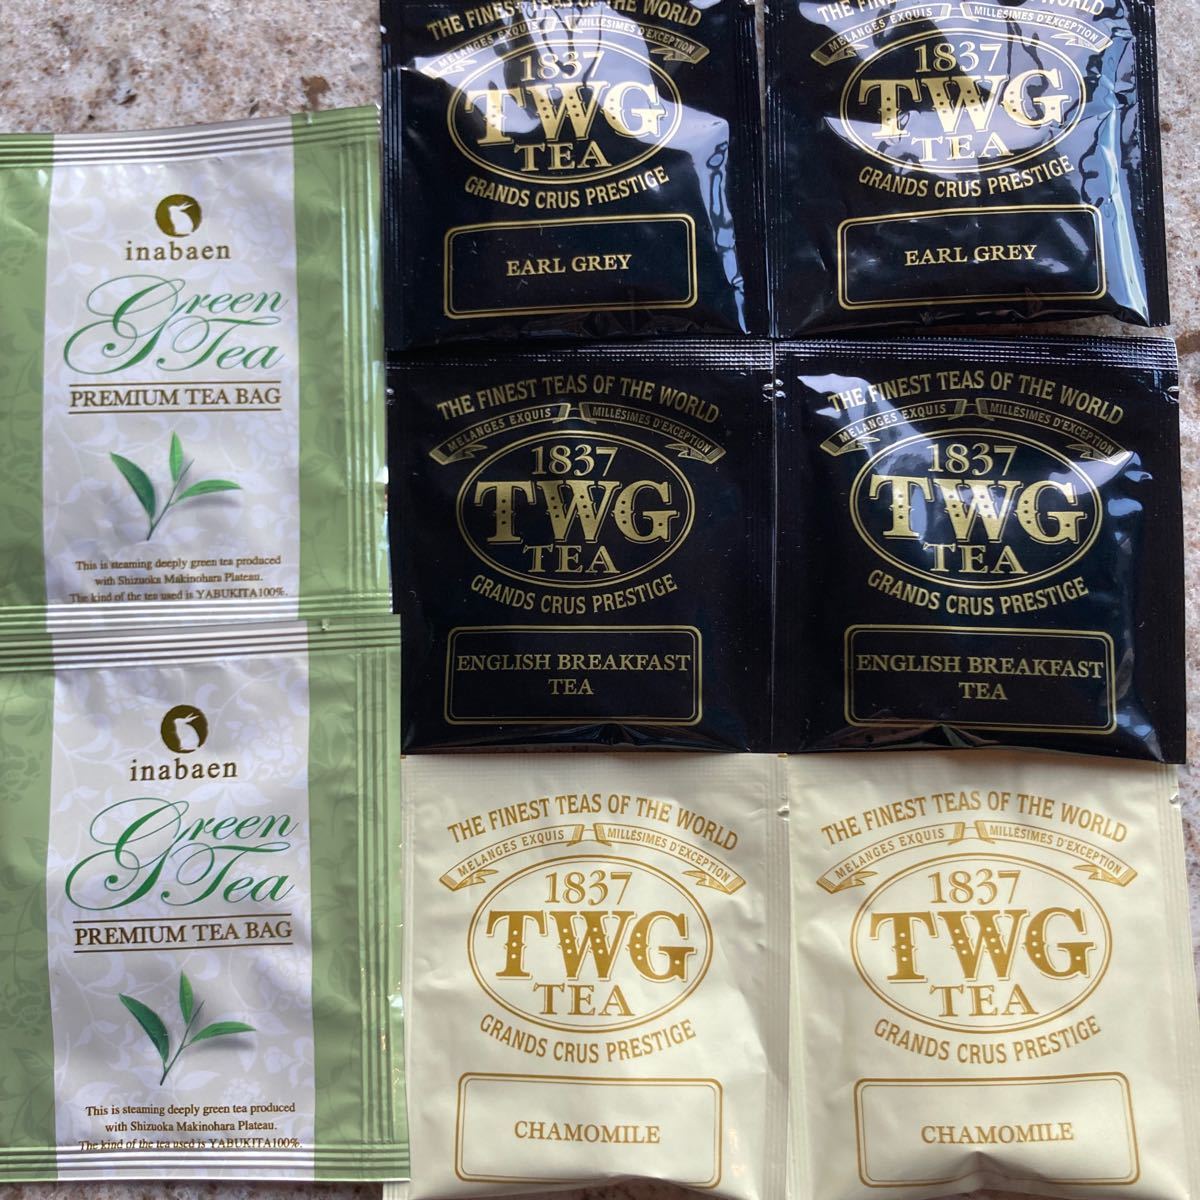 TWG 紅茶　ティーバッグ　6袋　いなば園　緑茶　２袋